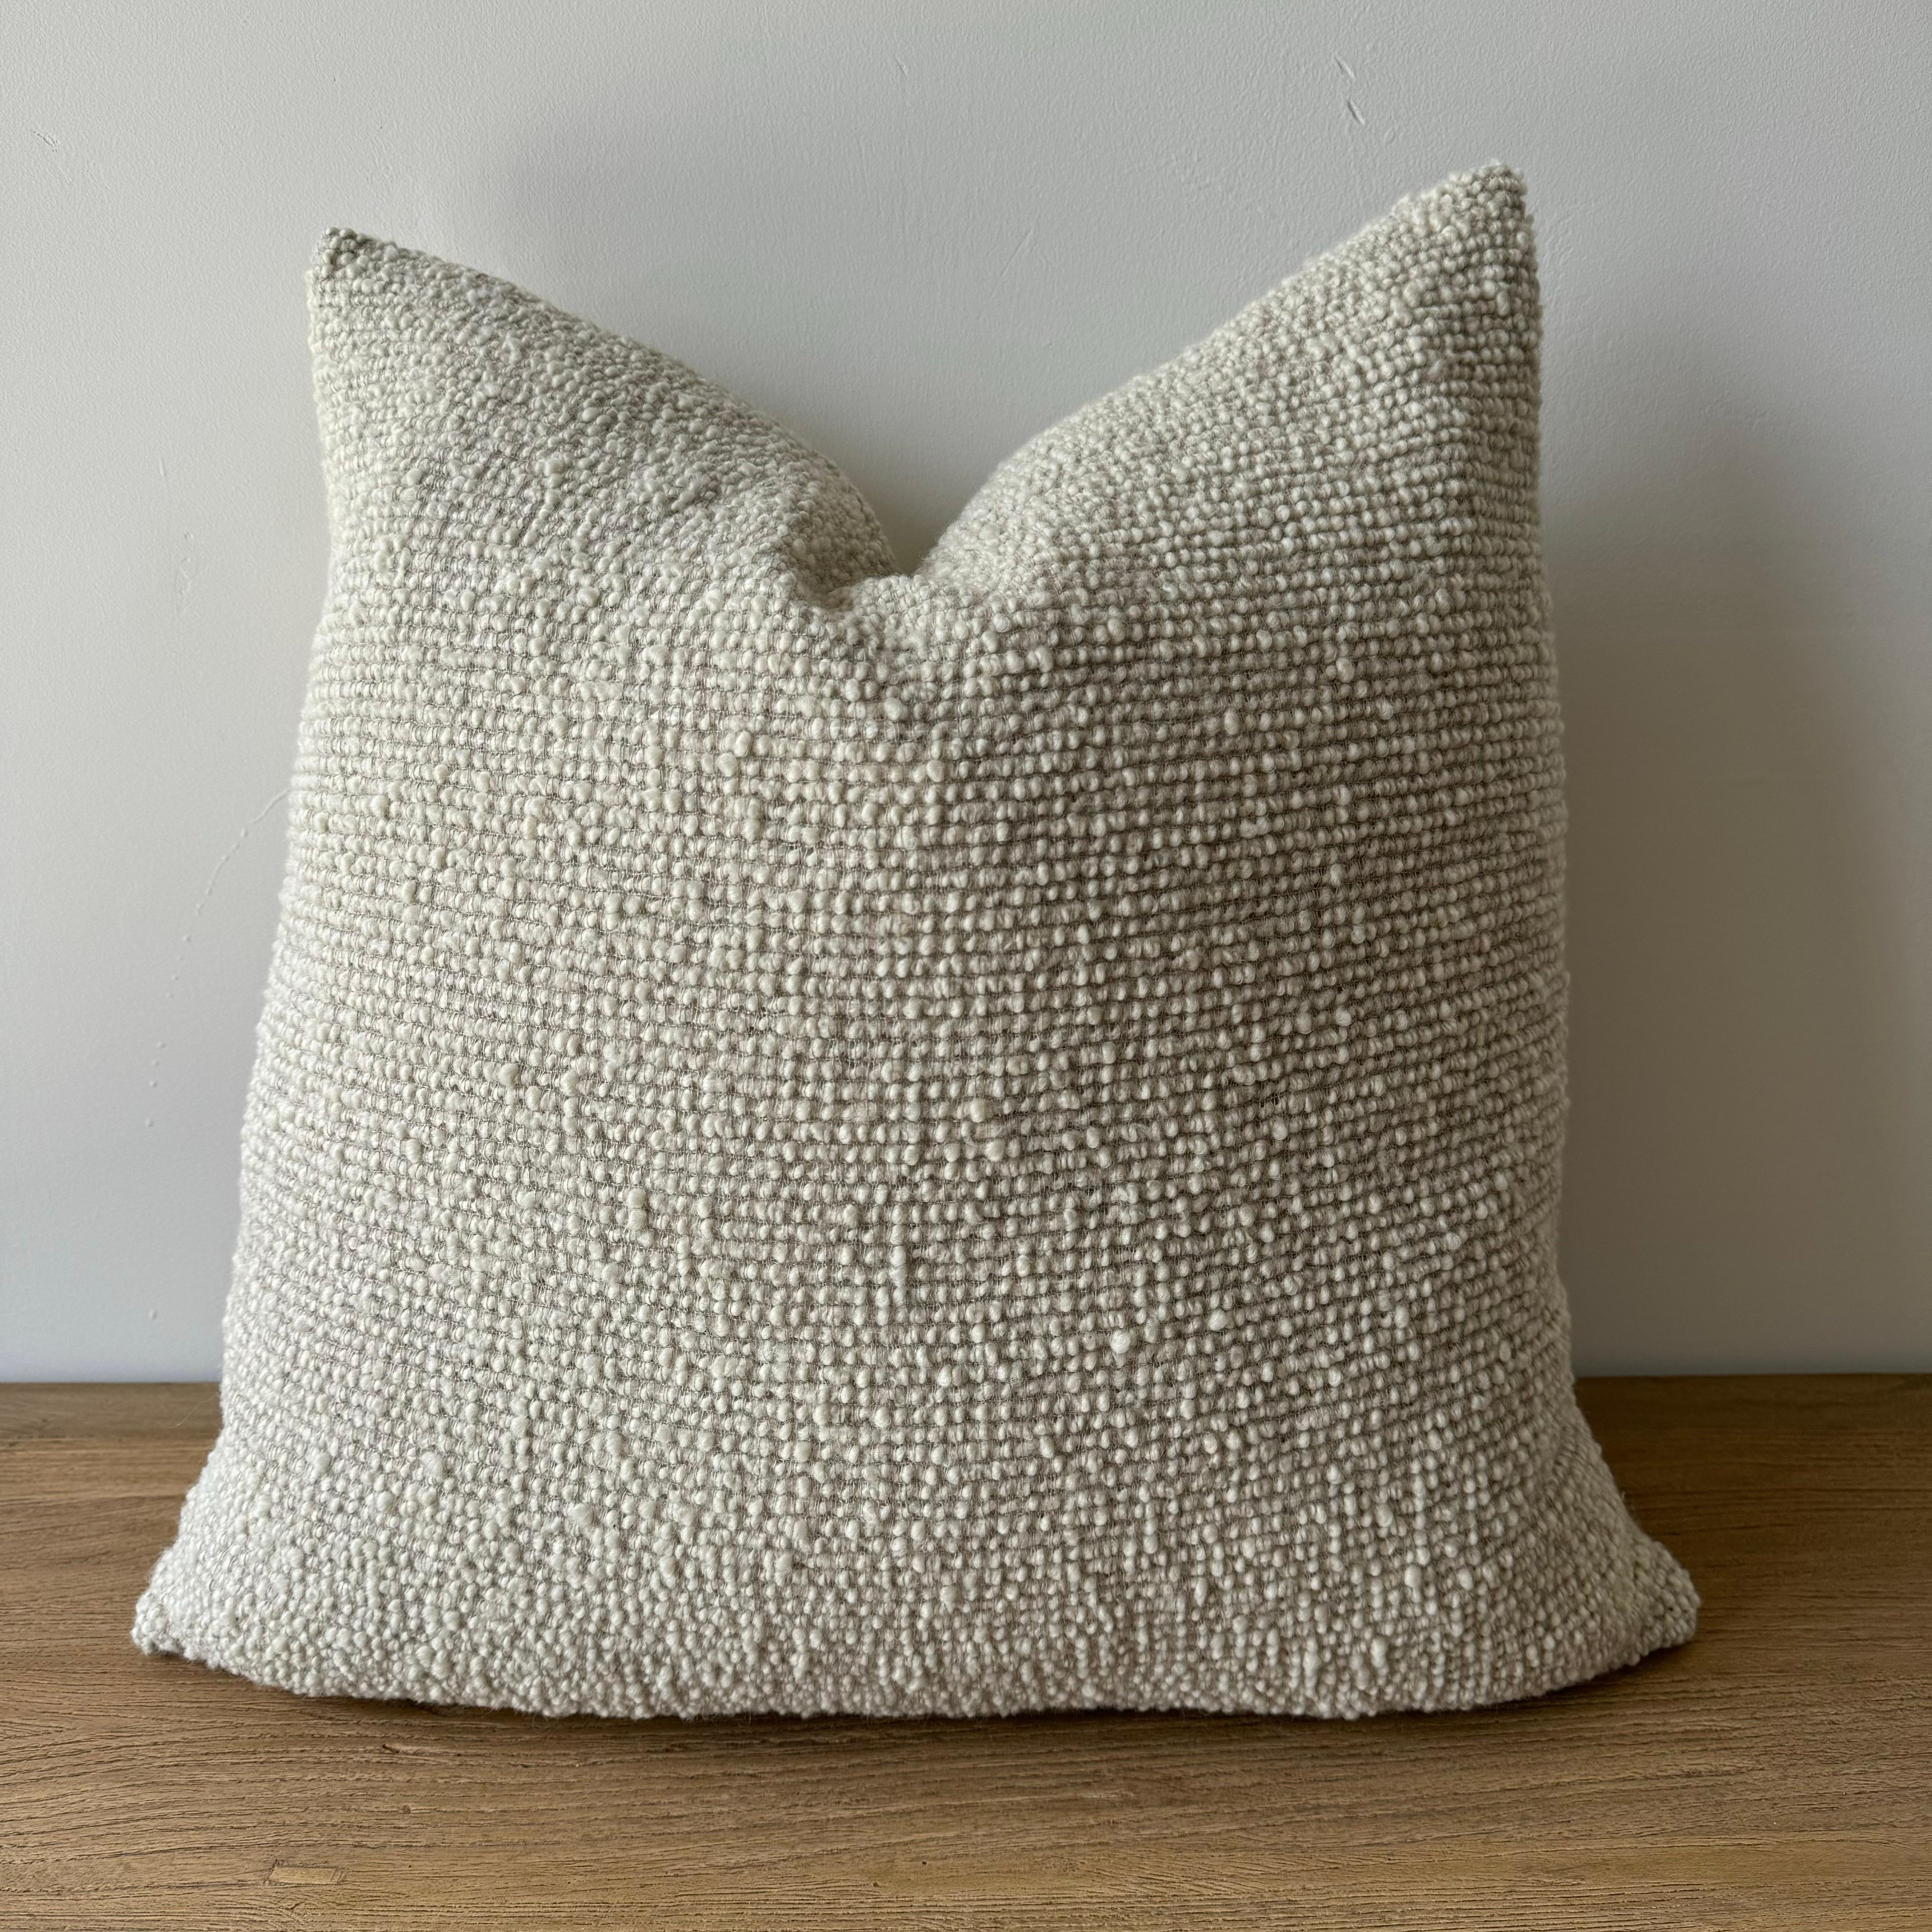 Oatmeal and natural flax wool and linen woven fibers in a stonewash finish create this luxurious soft pillow. Sewn with an antique brass zipper closure and overlocked edges.
Includes Down/Feather Insert
Size: 22 x 22. (custom sizes available)
-20%